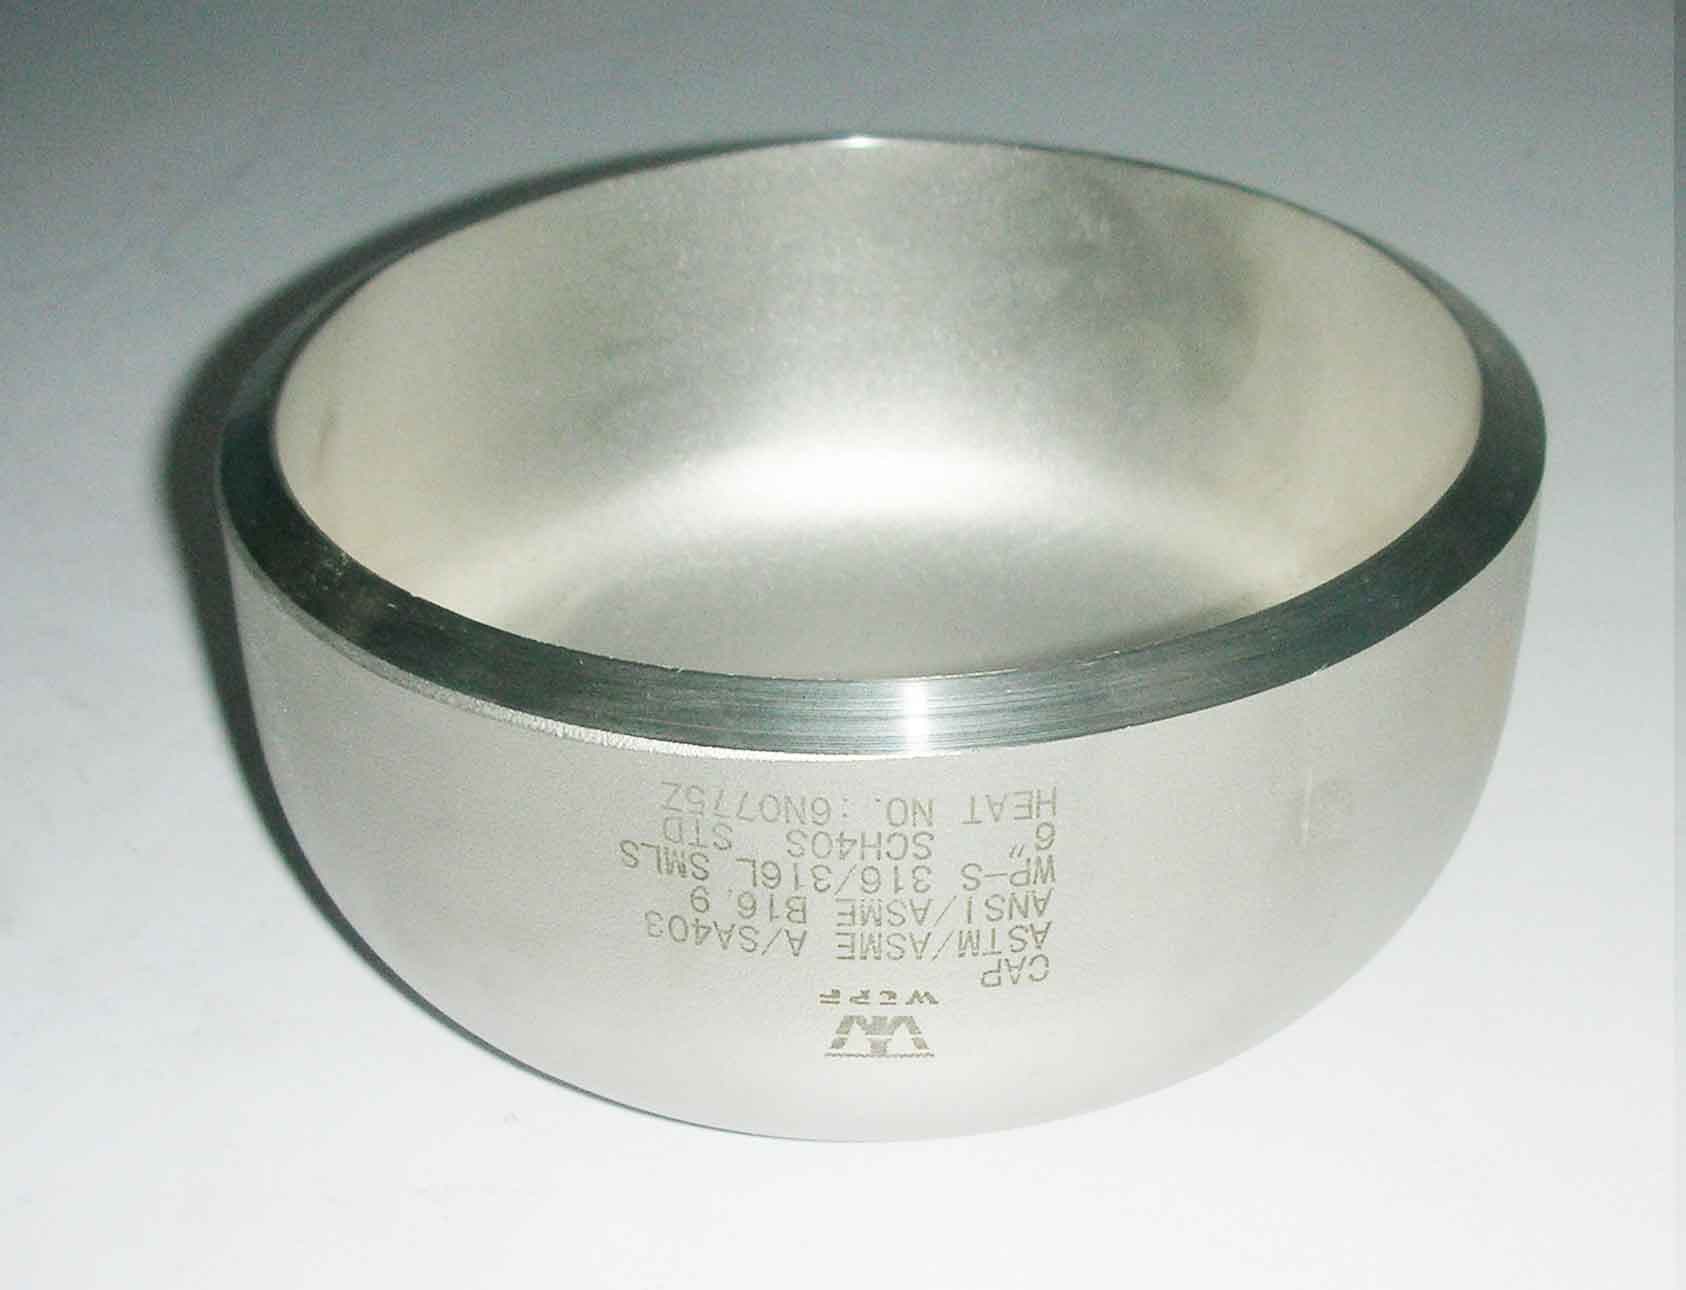 Stainless steel cap   26_9_2_3   DIN2617  SS316